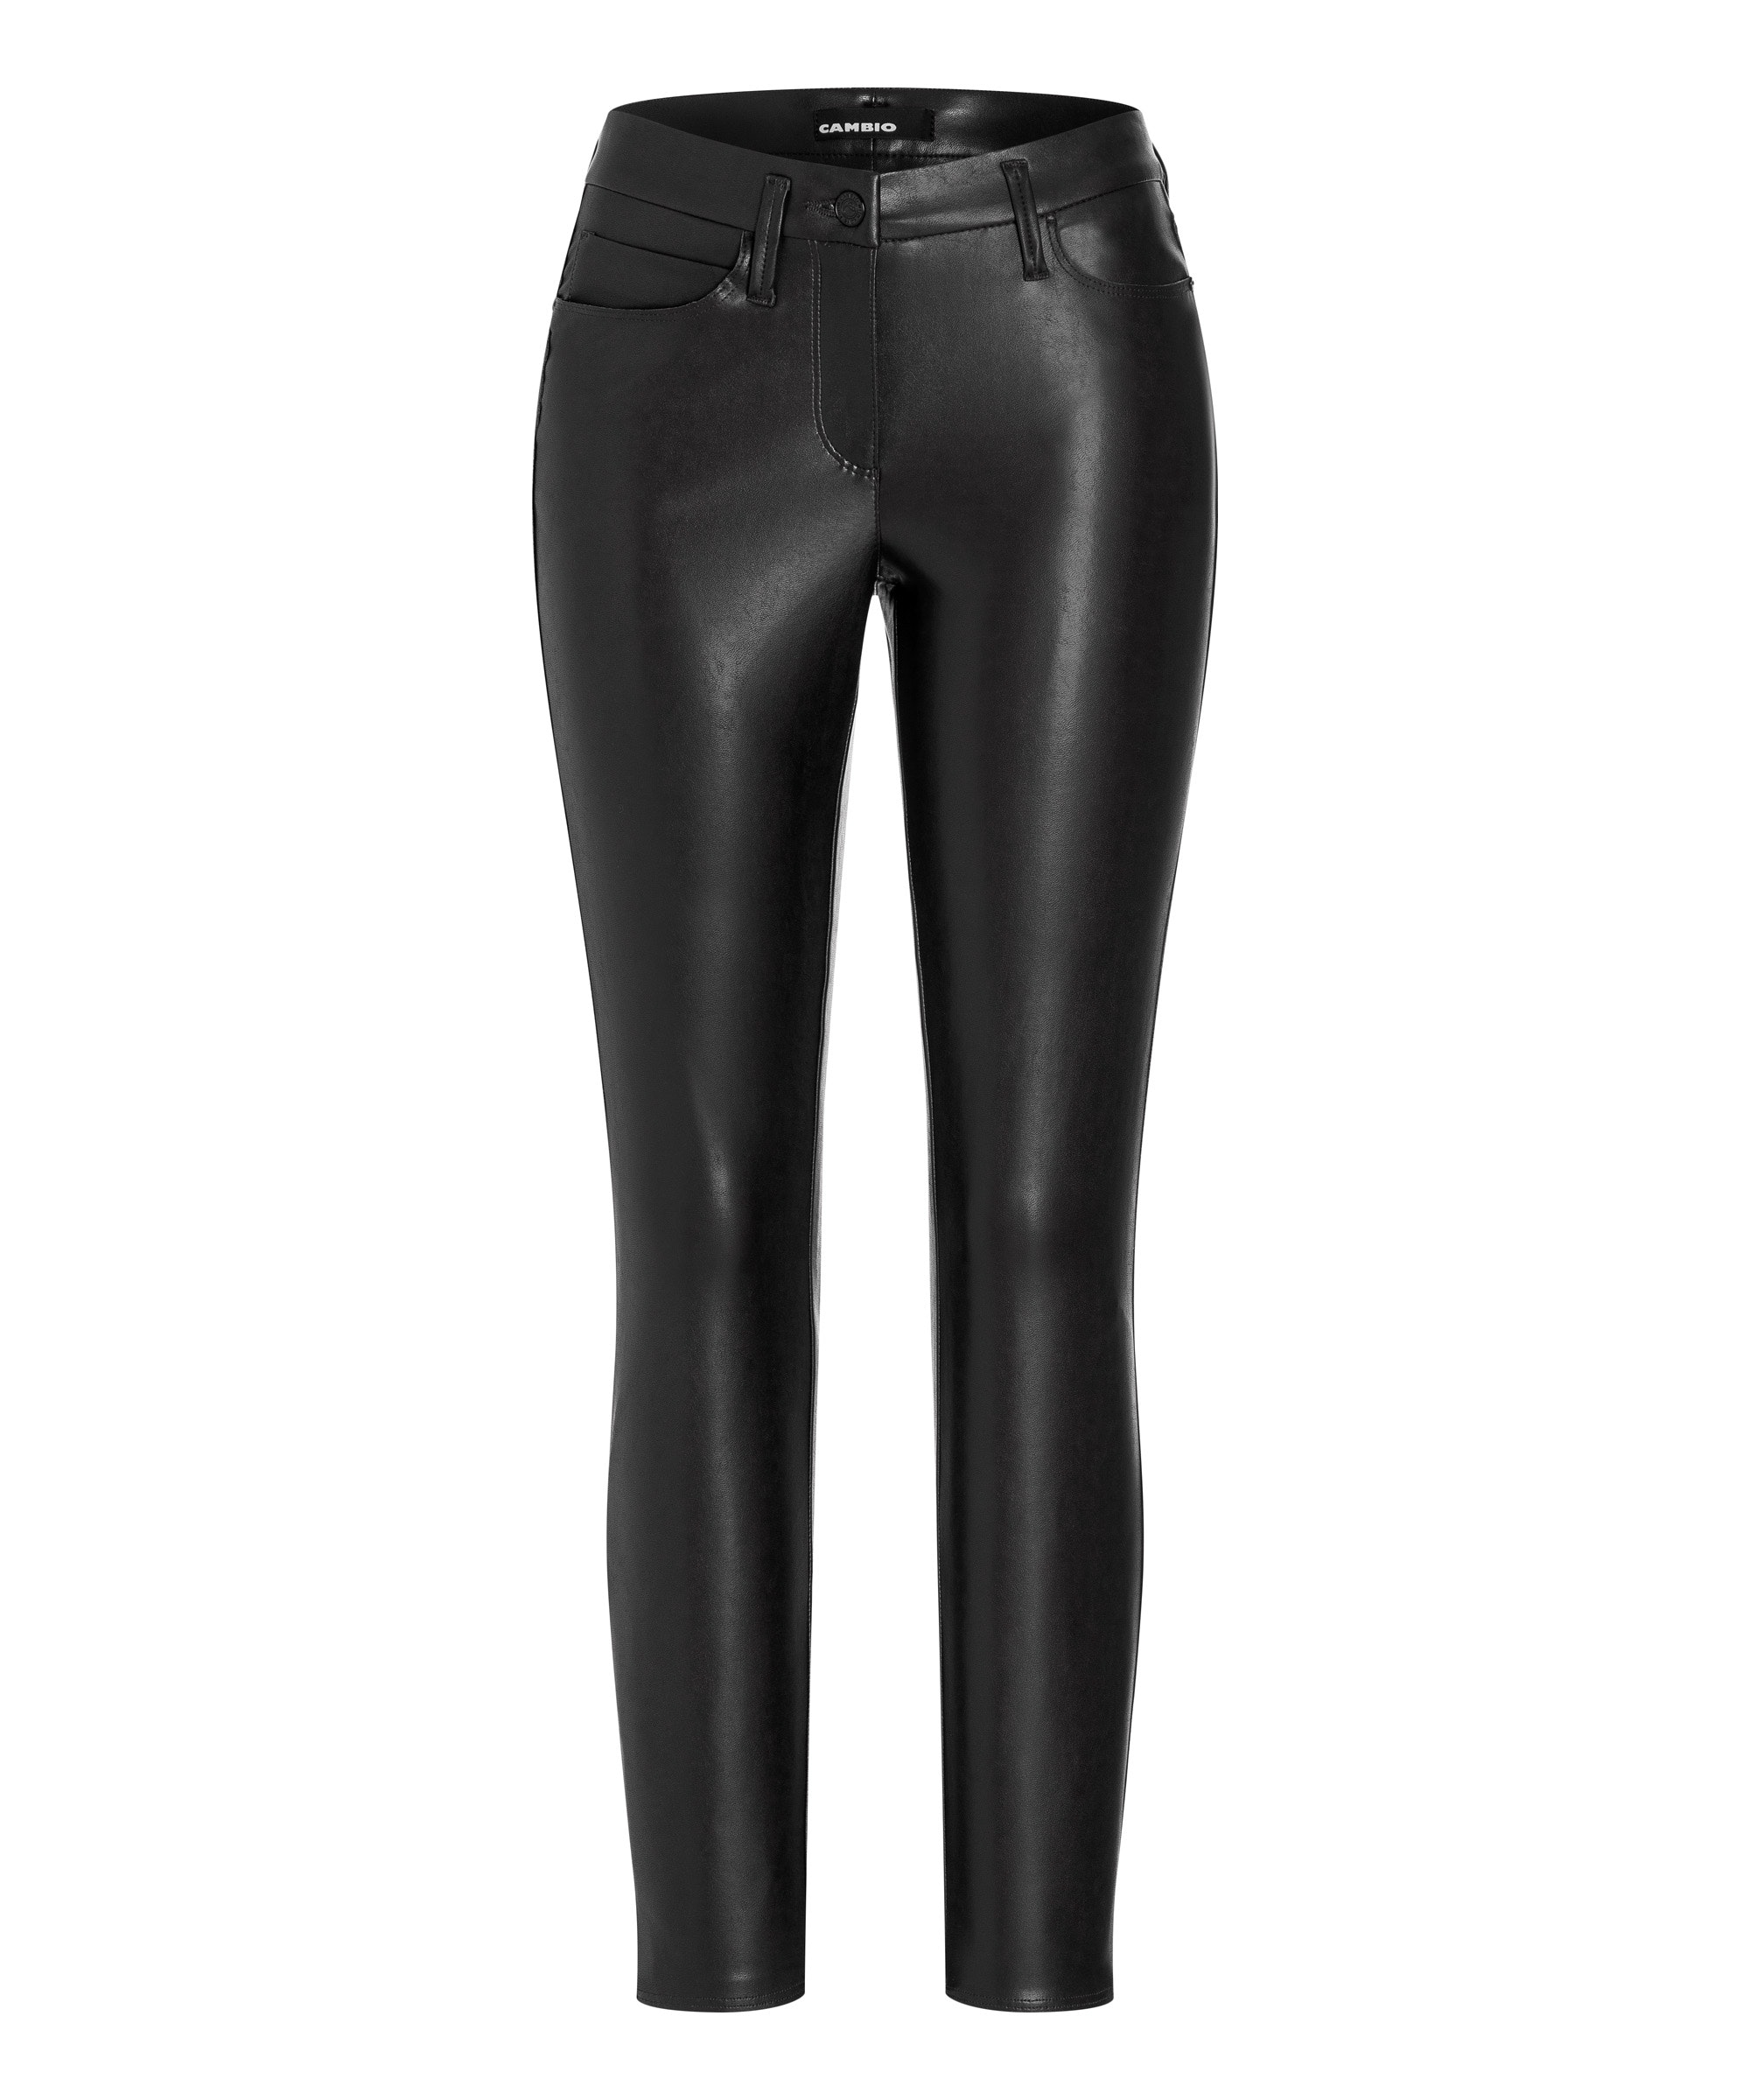 Cambio faux leather pants Ray - 5 pocket BLACK